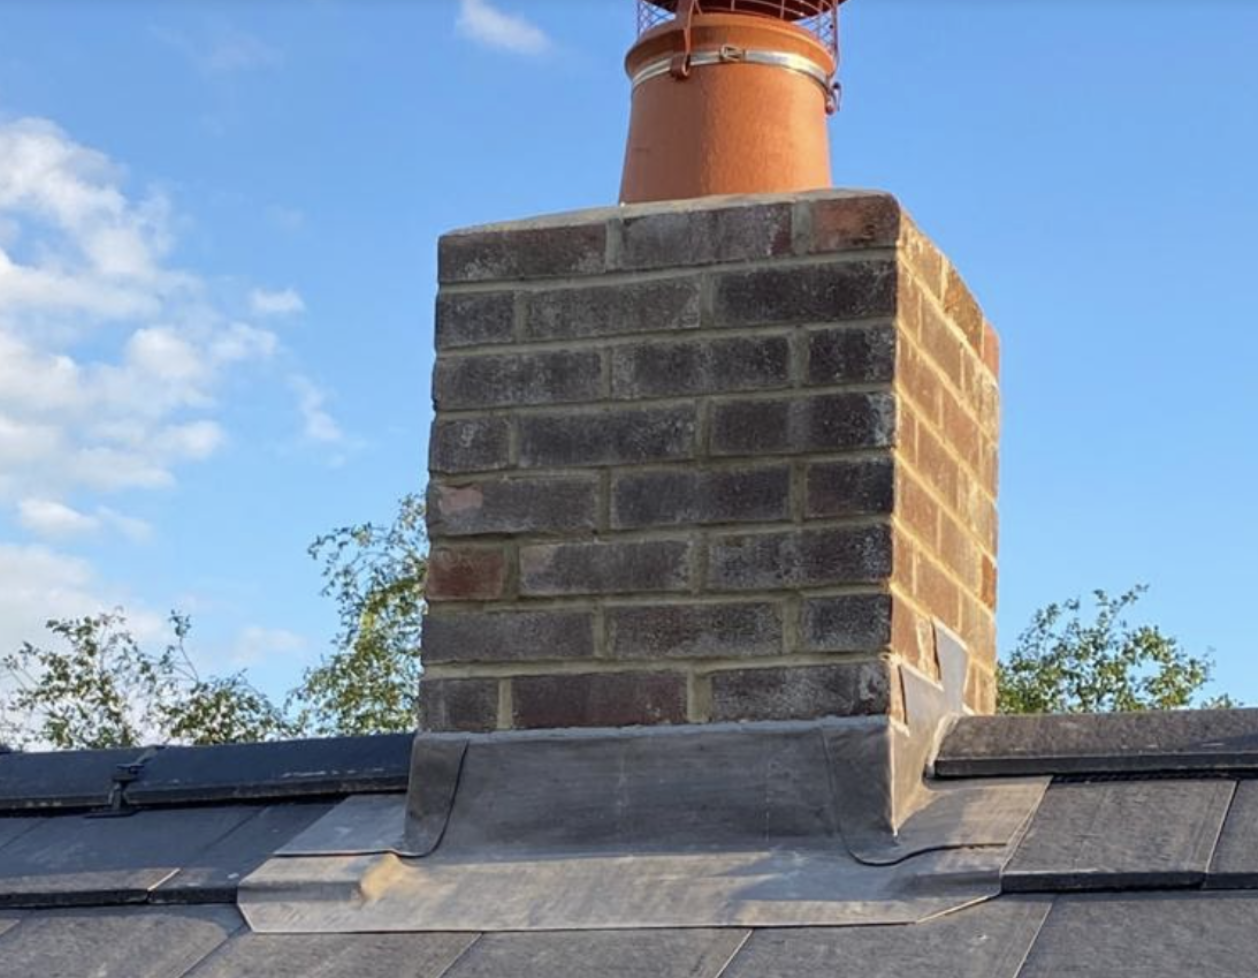 Chimney Repointing Cost Guide